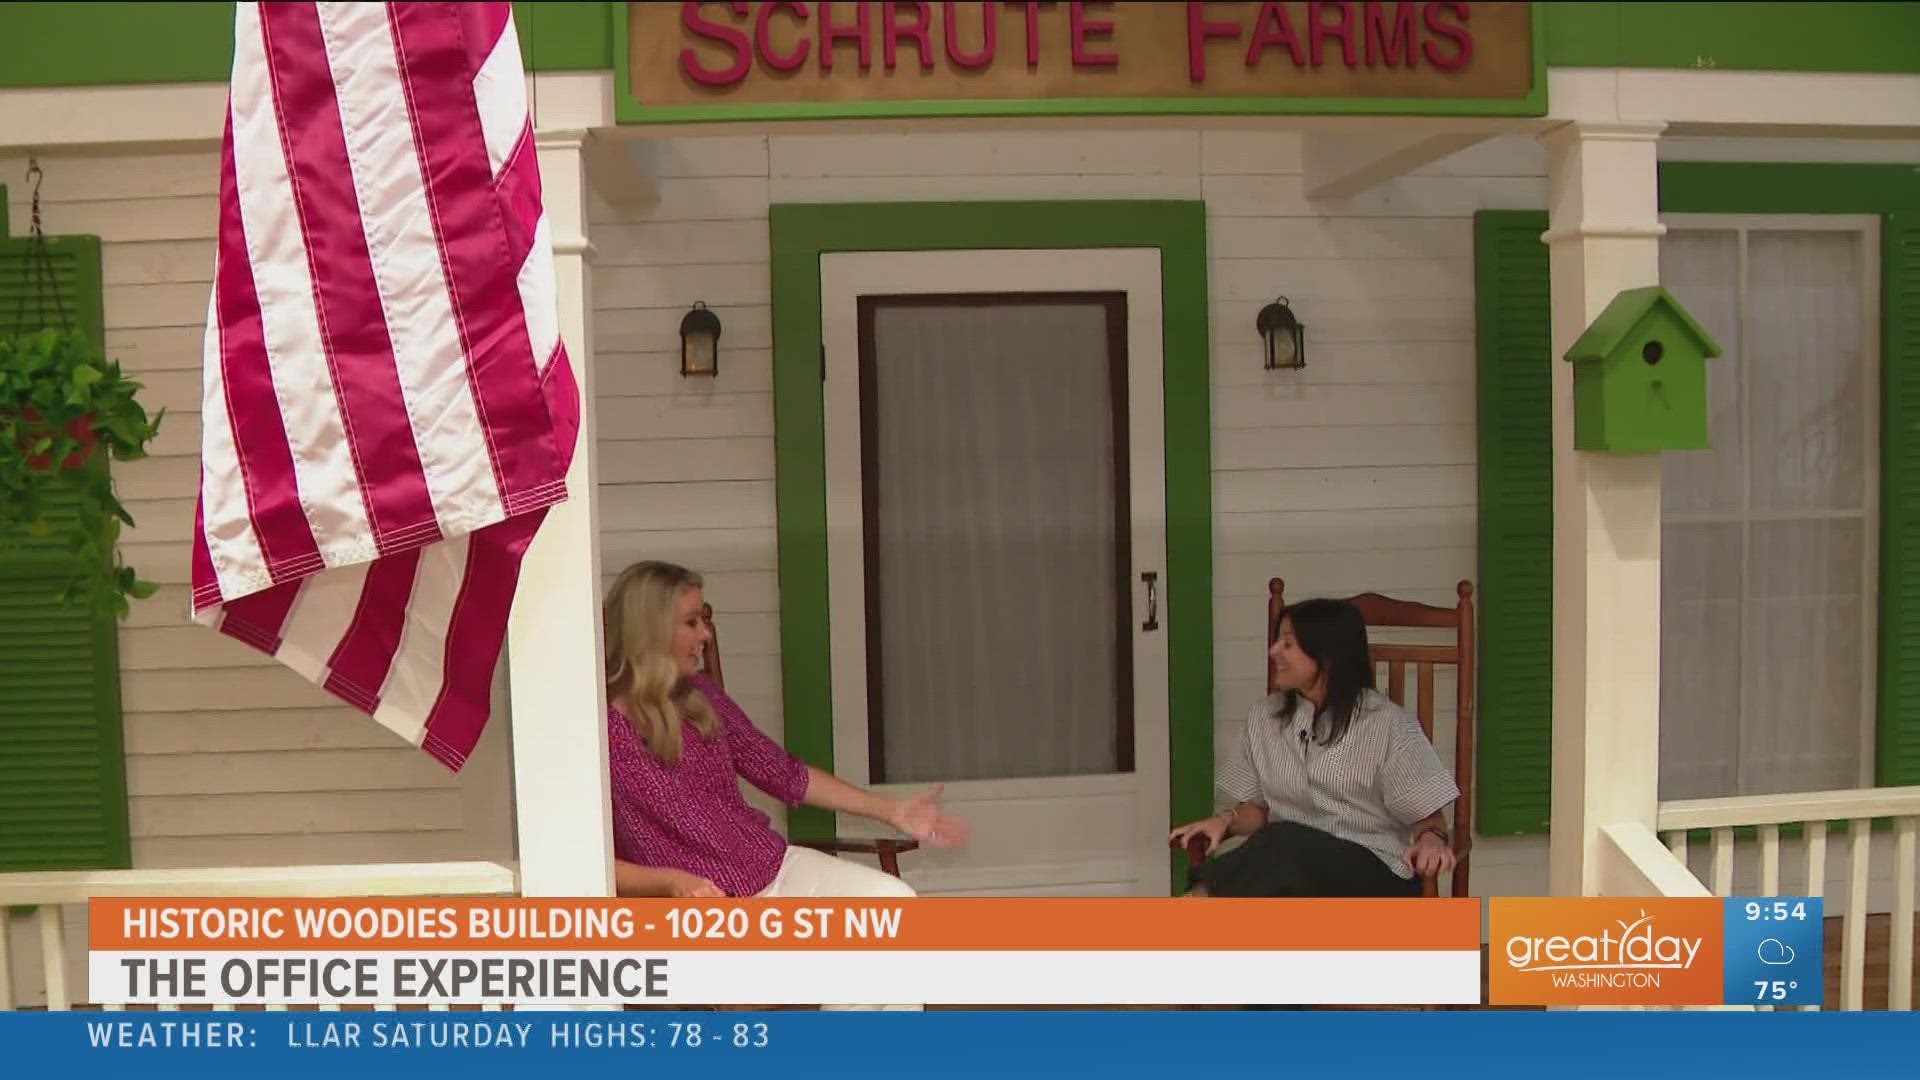 Kristen visits the Schurte Farms section of The Office Experience at the historic Woodies Building.